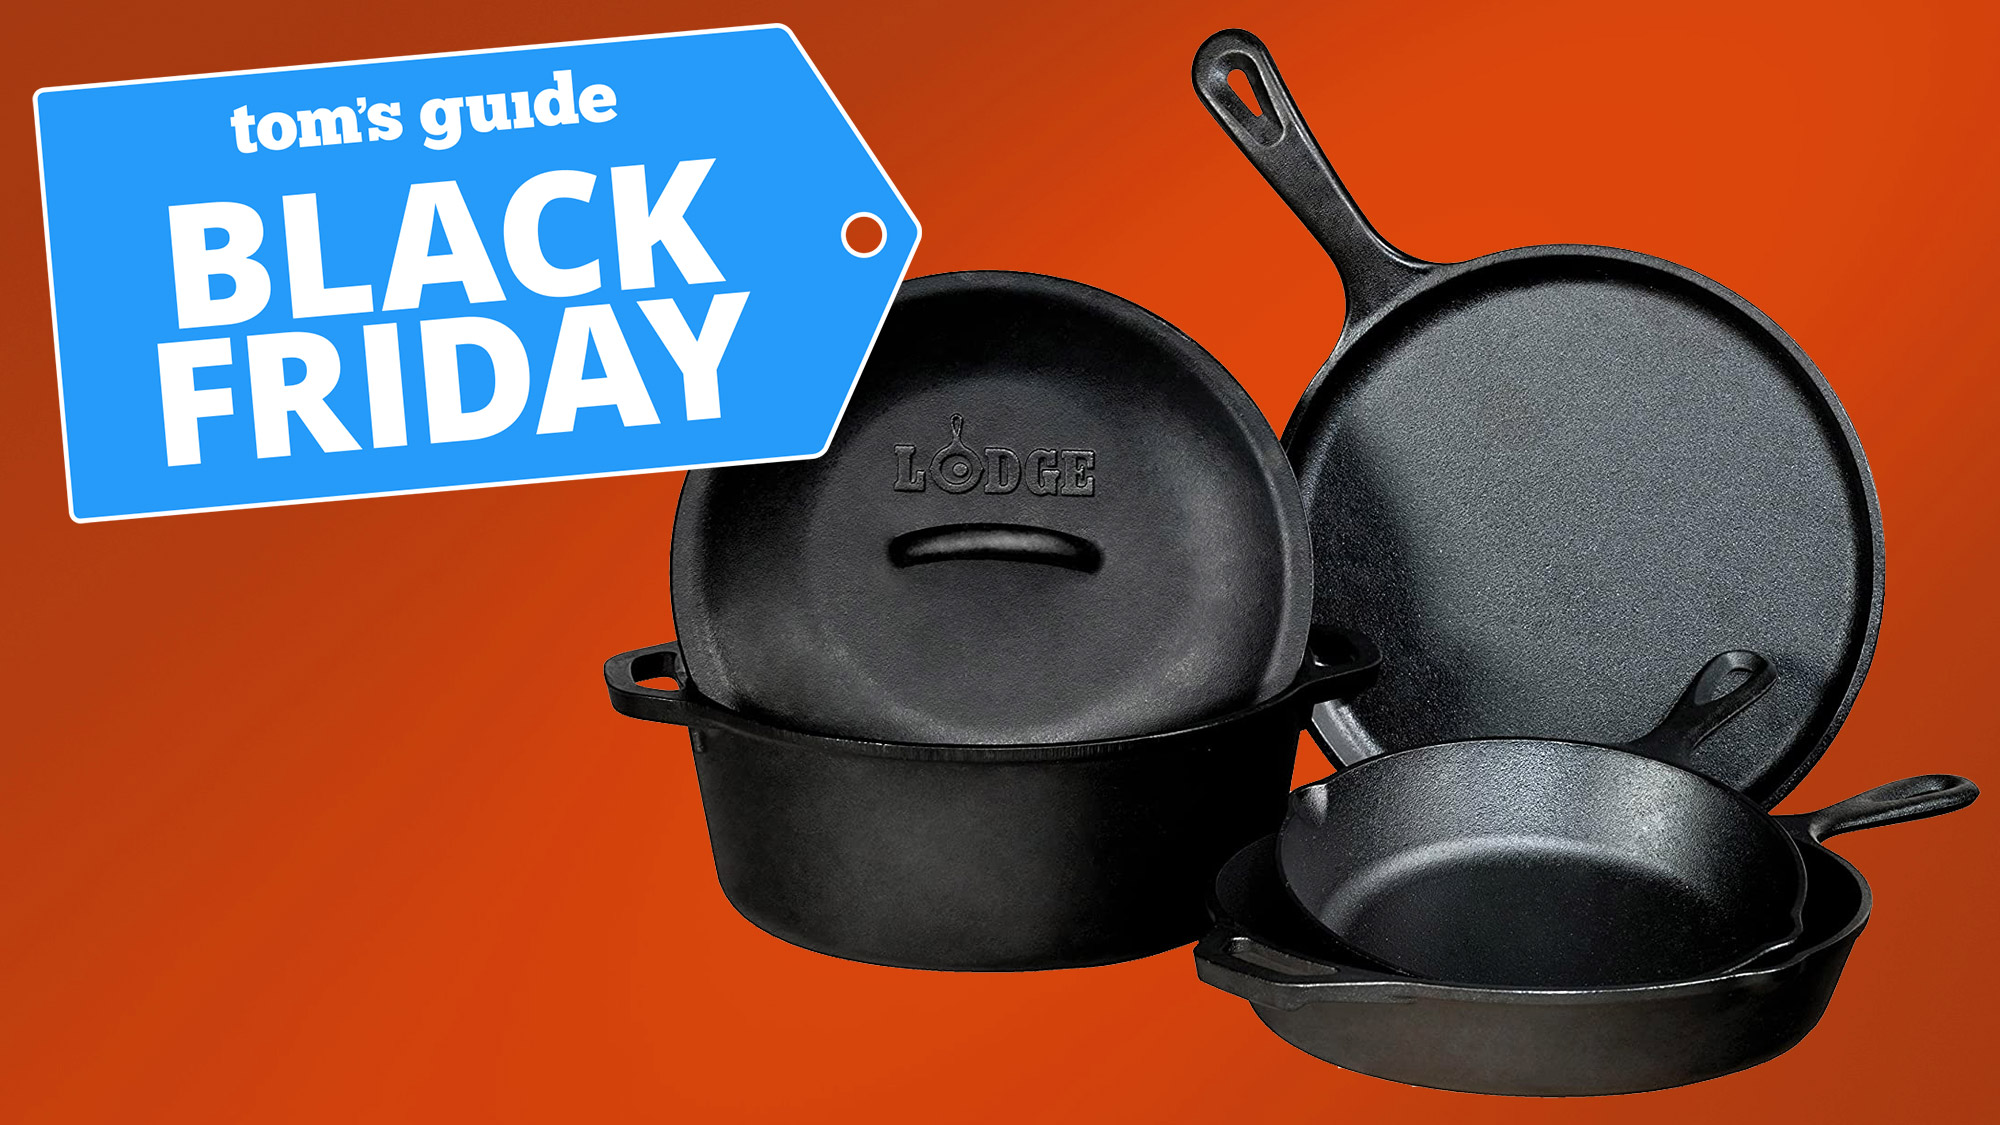 Lodge 5-Piece Cast Iron Cooking Set with Black Friday badge.